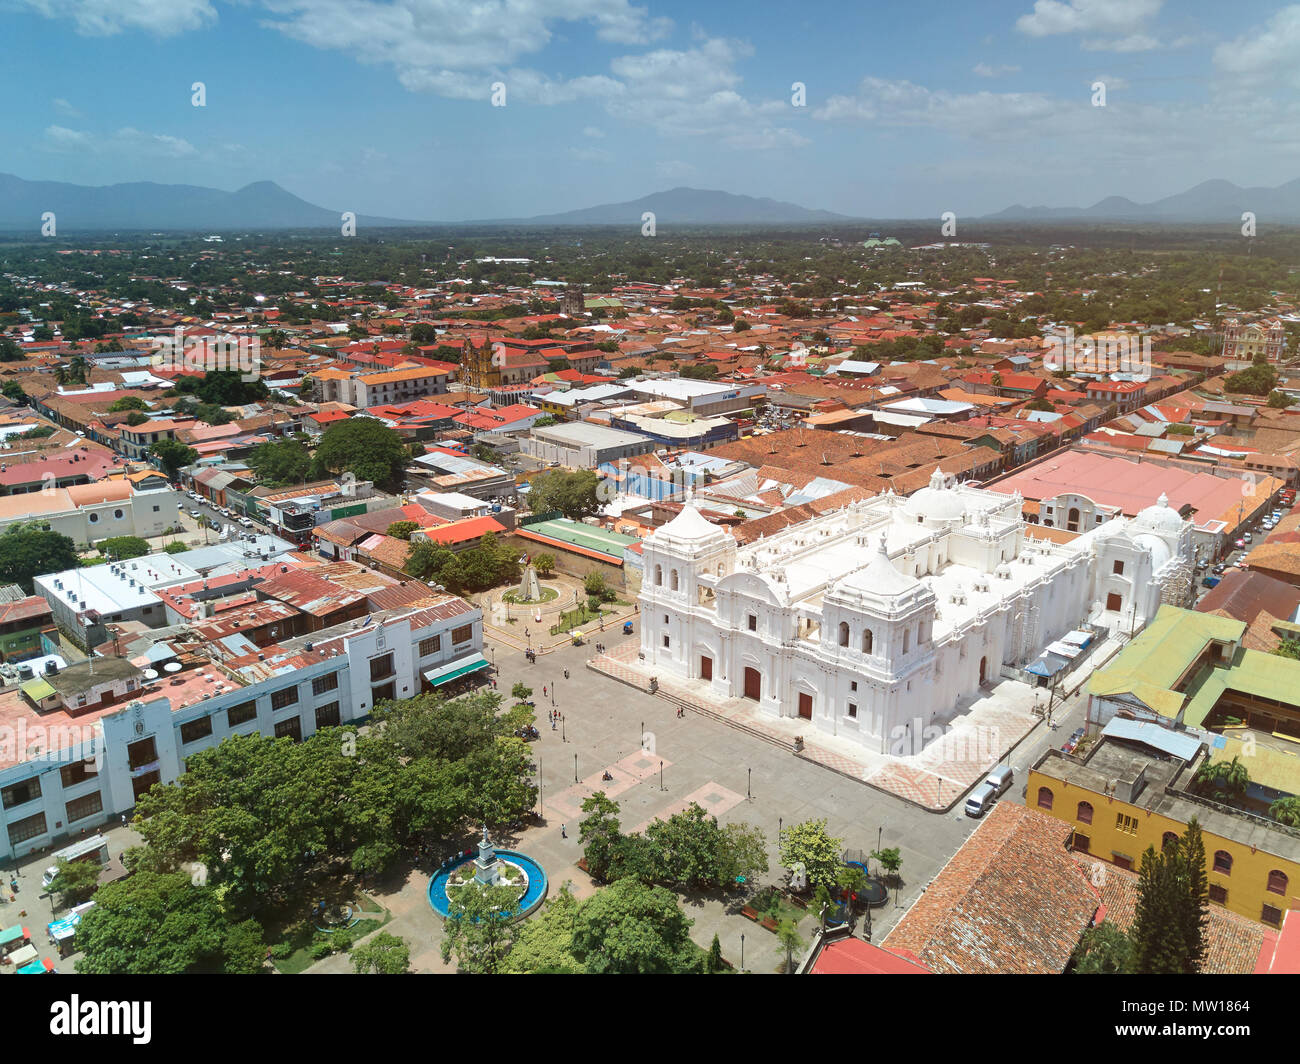 Panoramic view of Leon city in Nicaragua aerial view Stock Photo